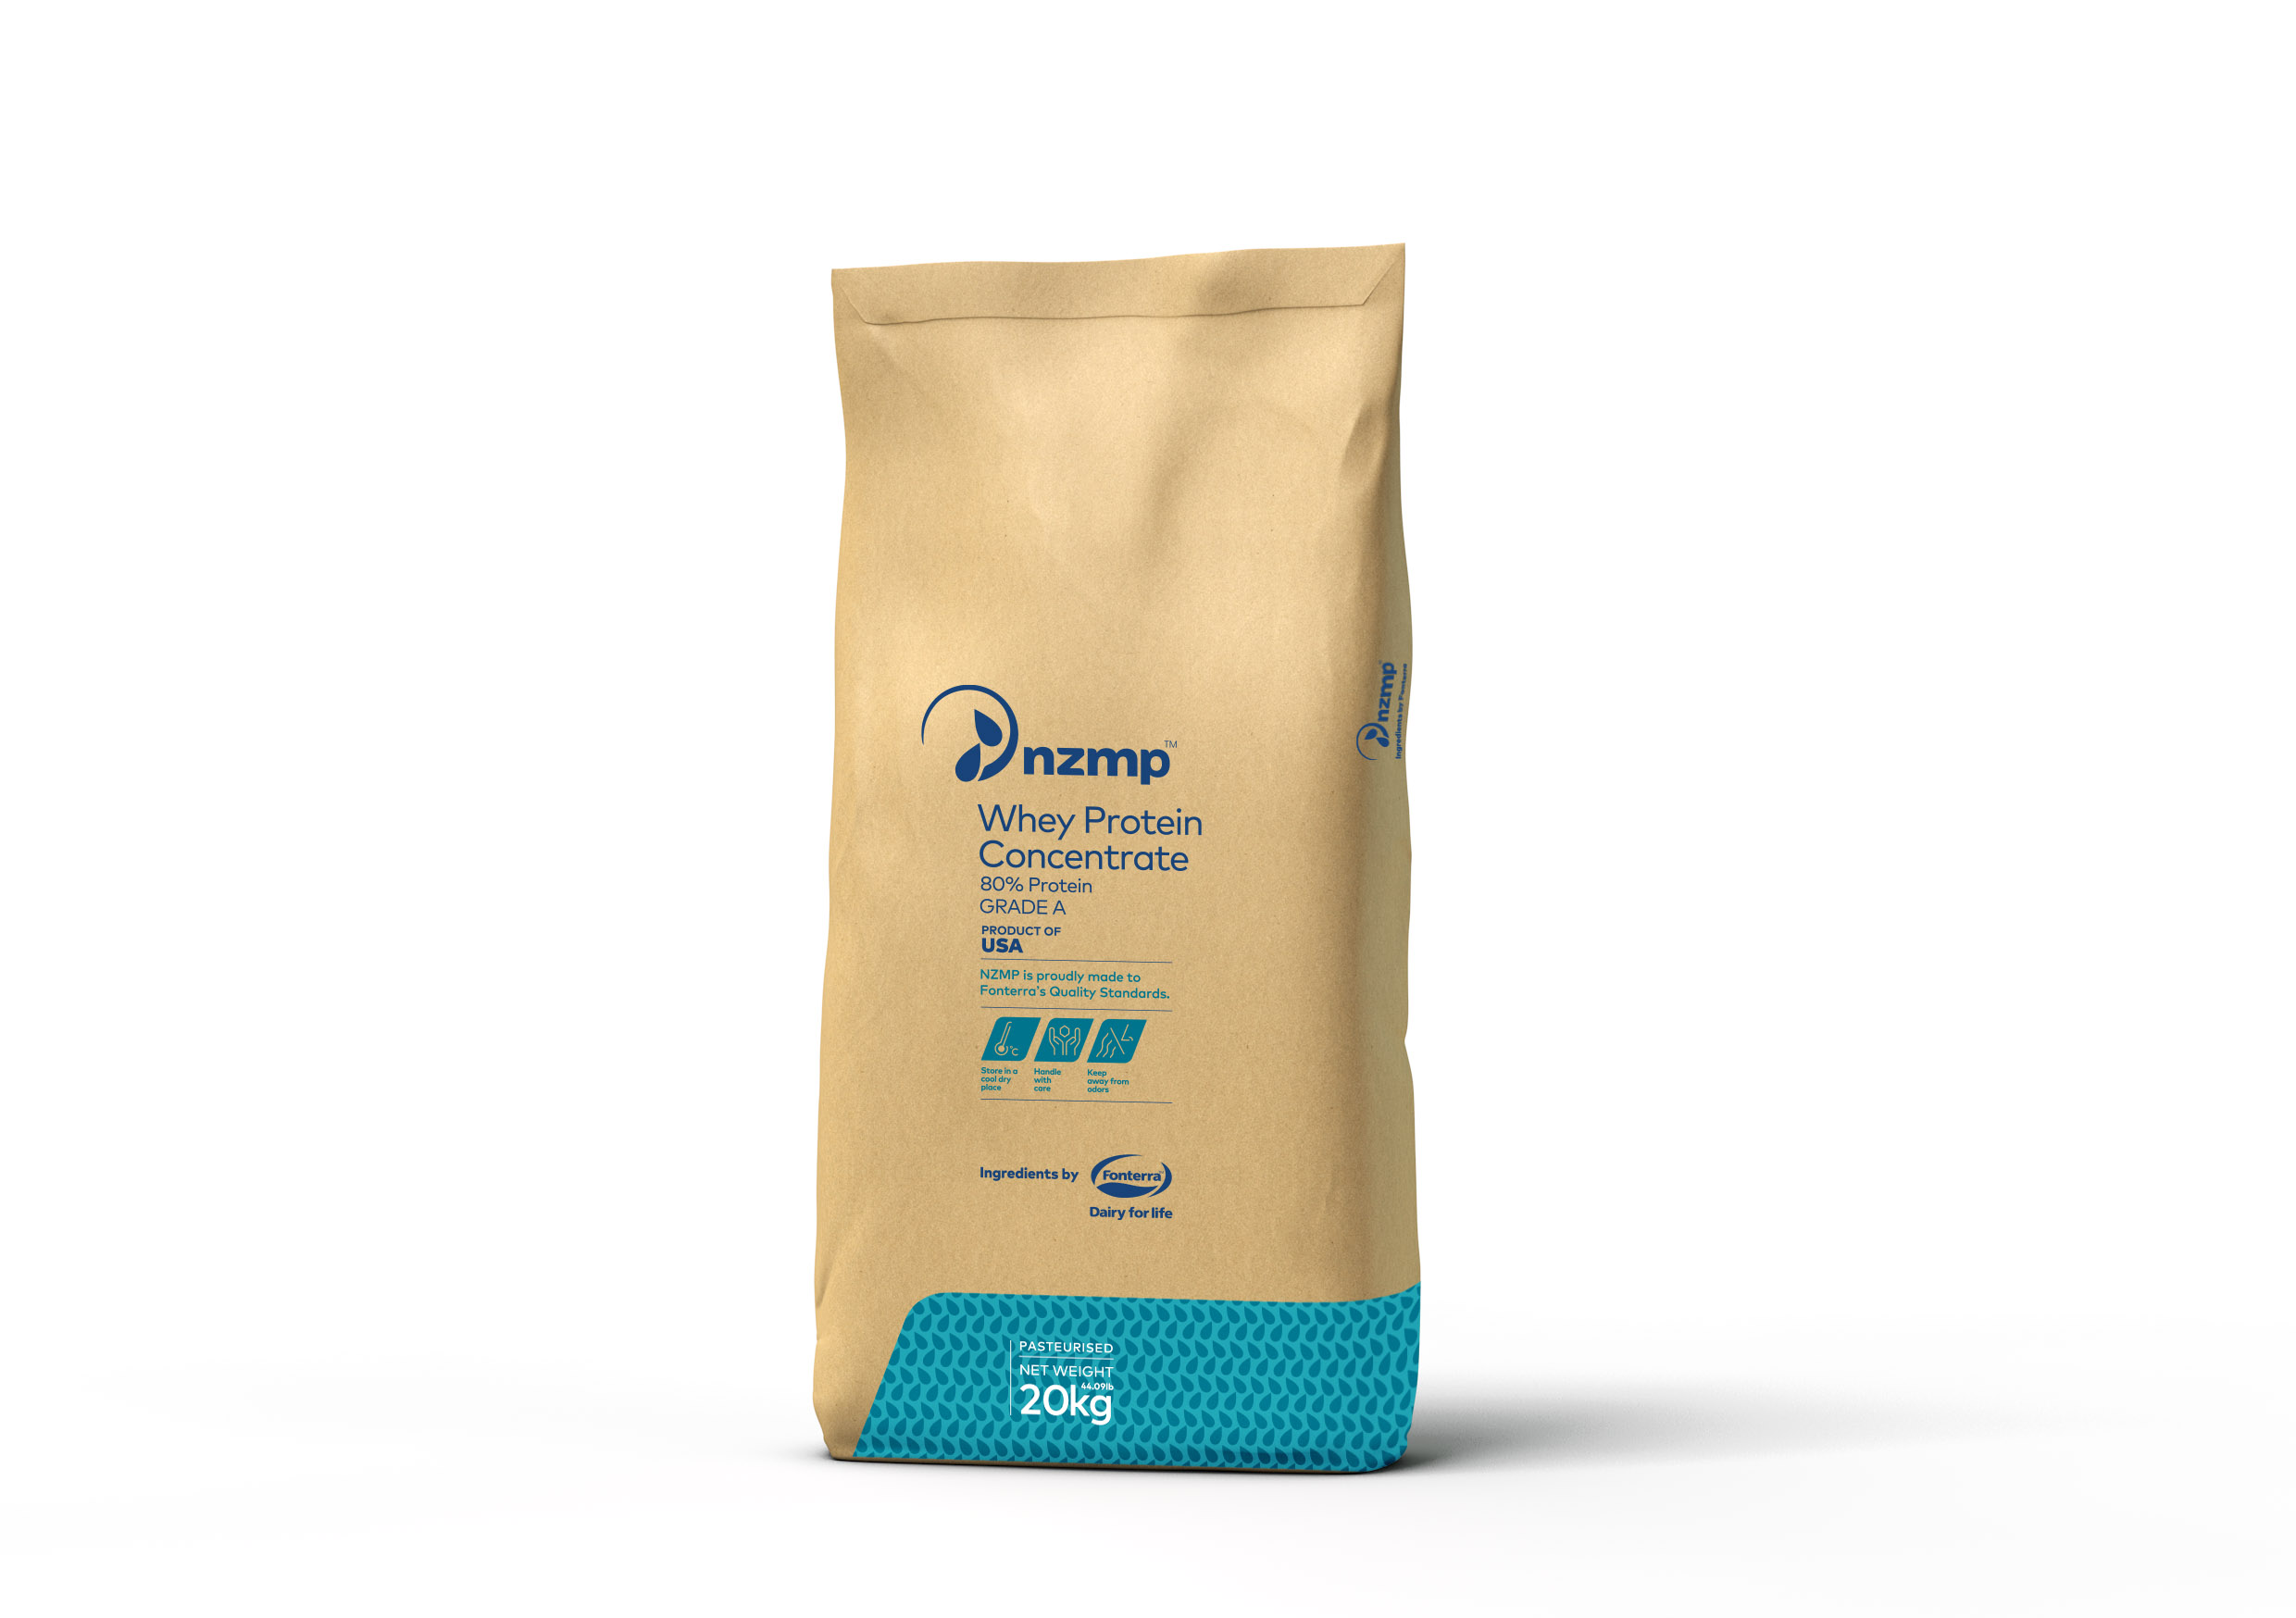 Whey Protein Concentrate Bag